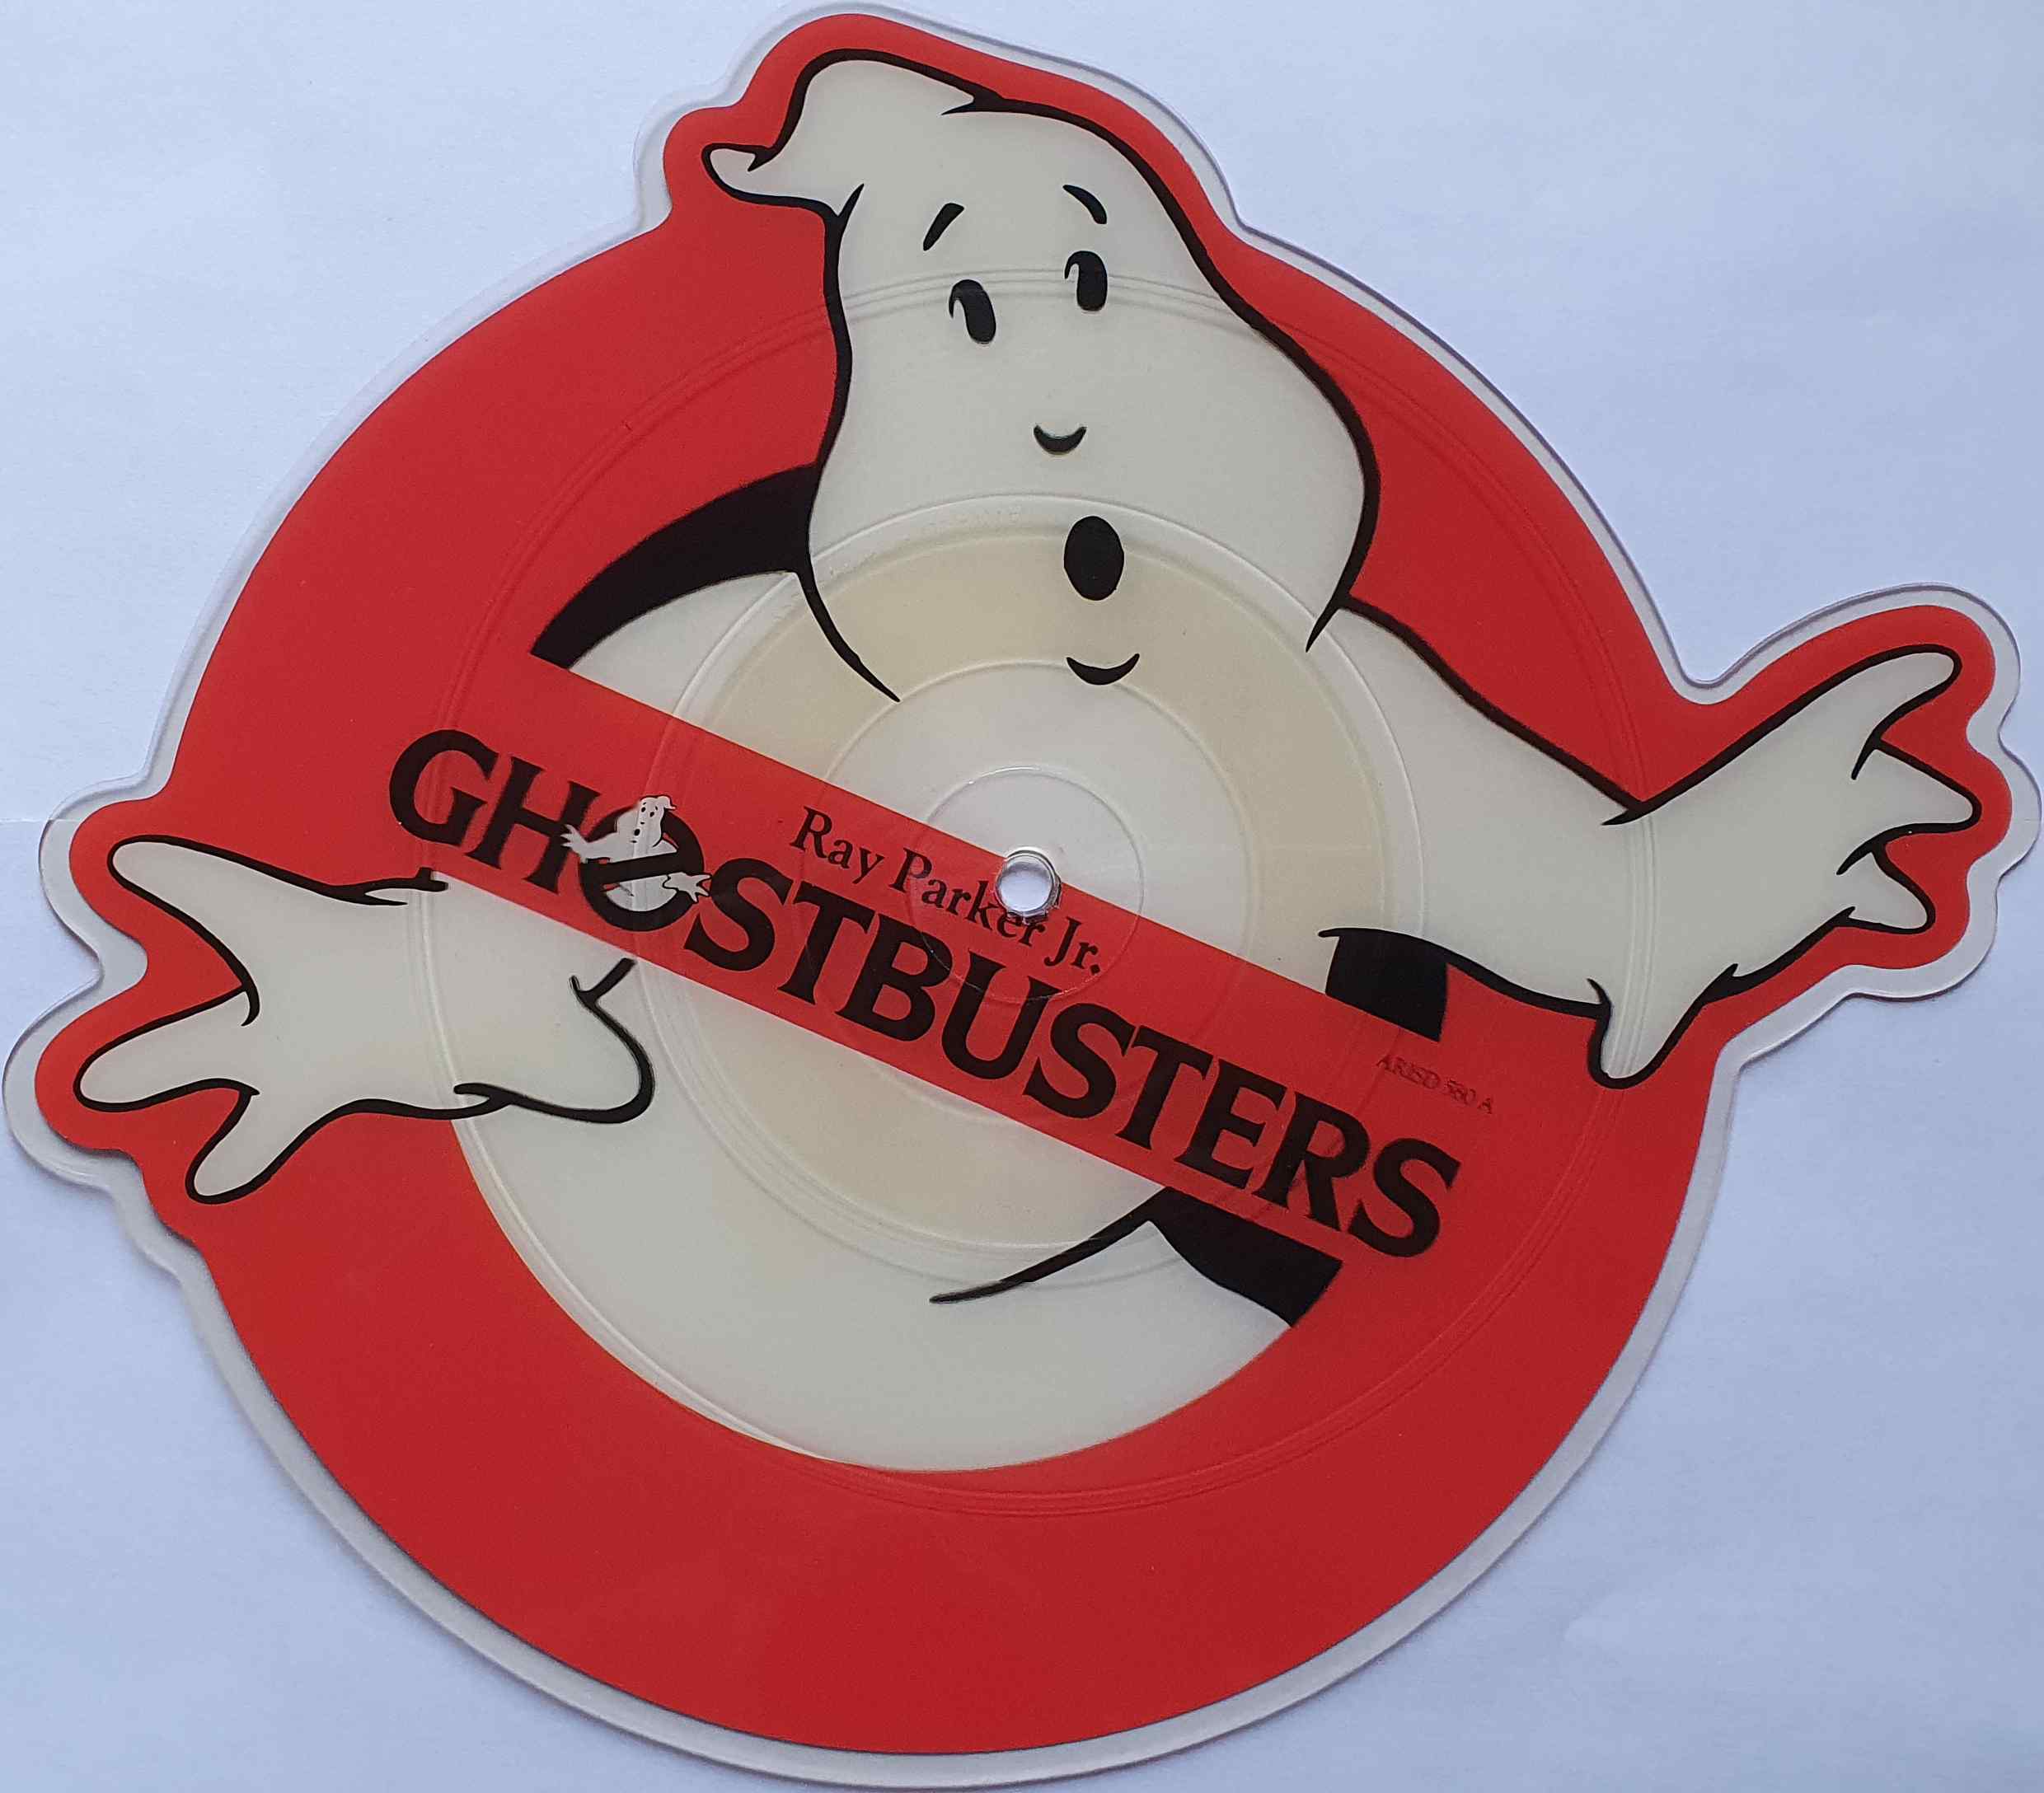 Picture of ARISD 580 Ghostbusters by artist Ray Parker Junior from ITV, Channel 4 and Channel 5 library